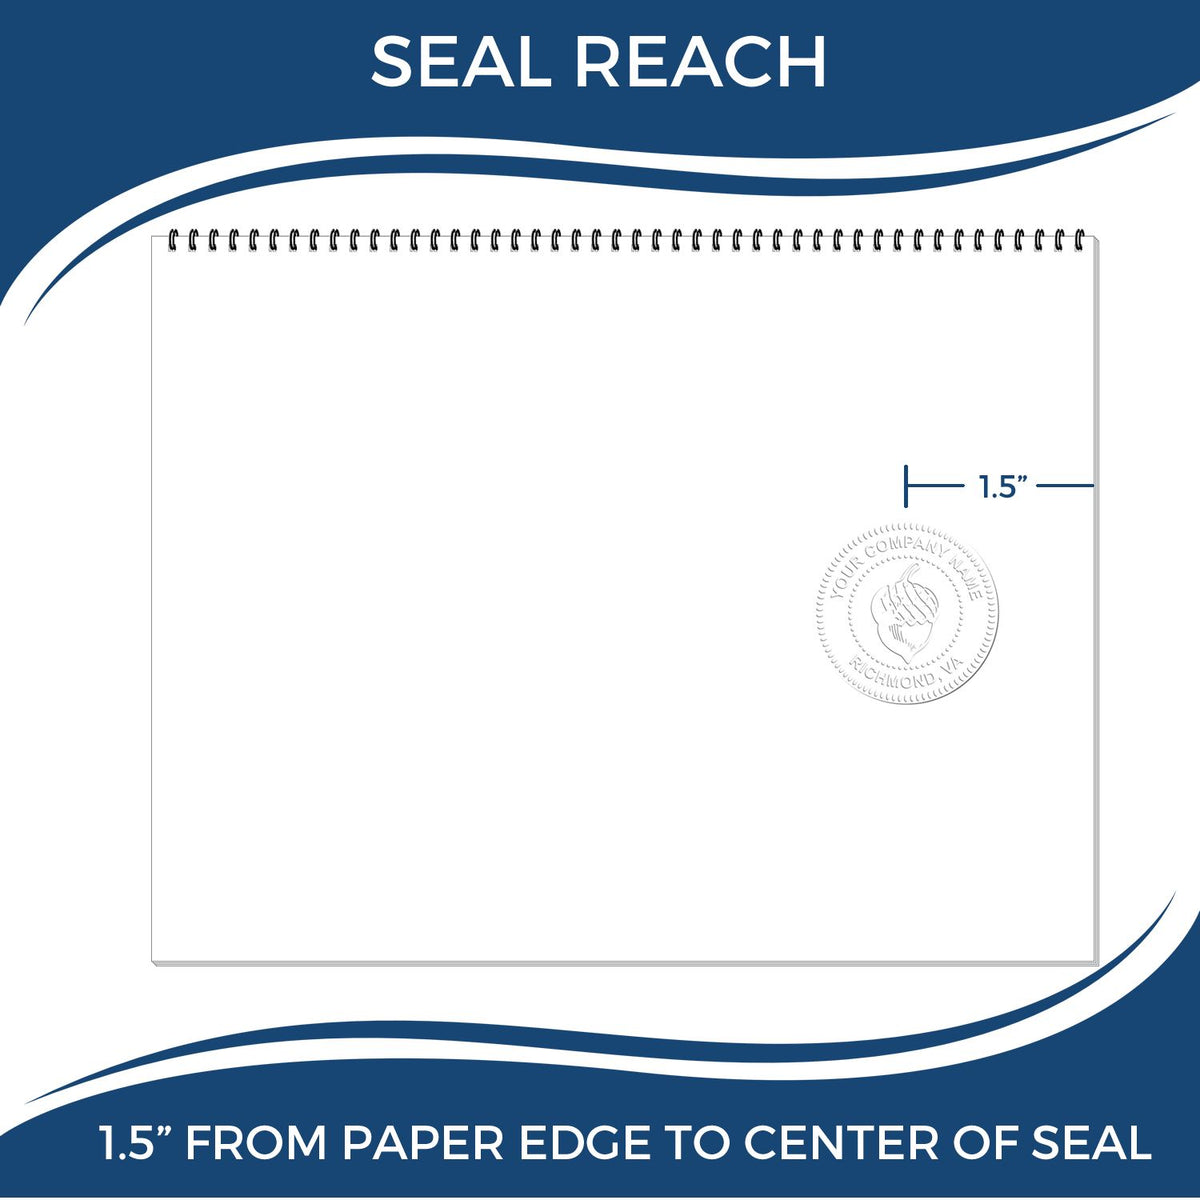 An infographic showing the seal reach which is represented by a ruler and a miniature seal image of the Gift New York Architect Seal